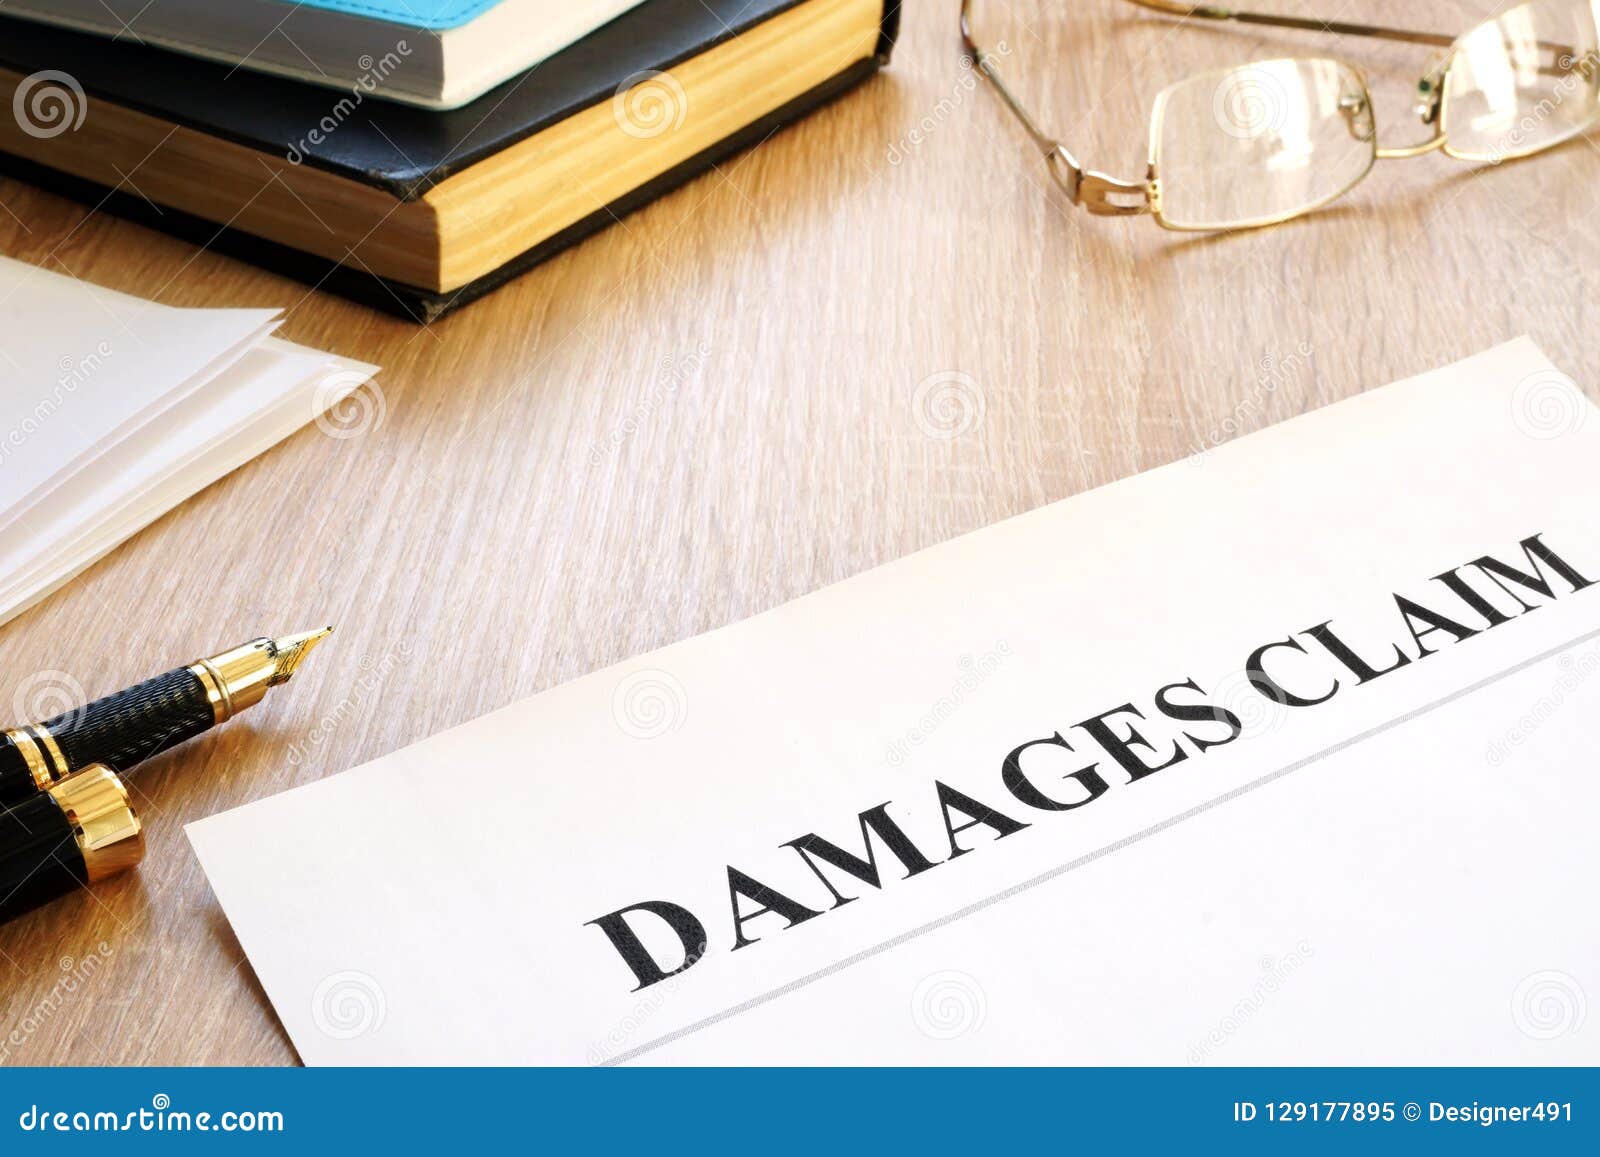 damages claim form and pen. insurance.